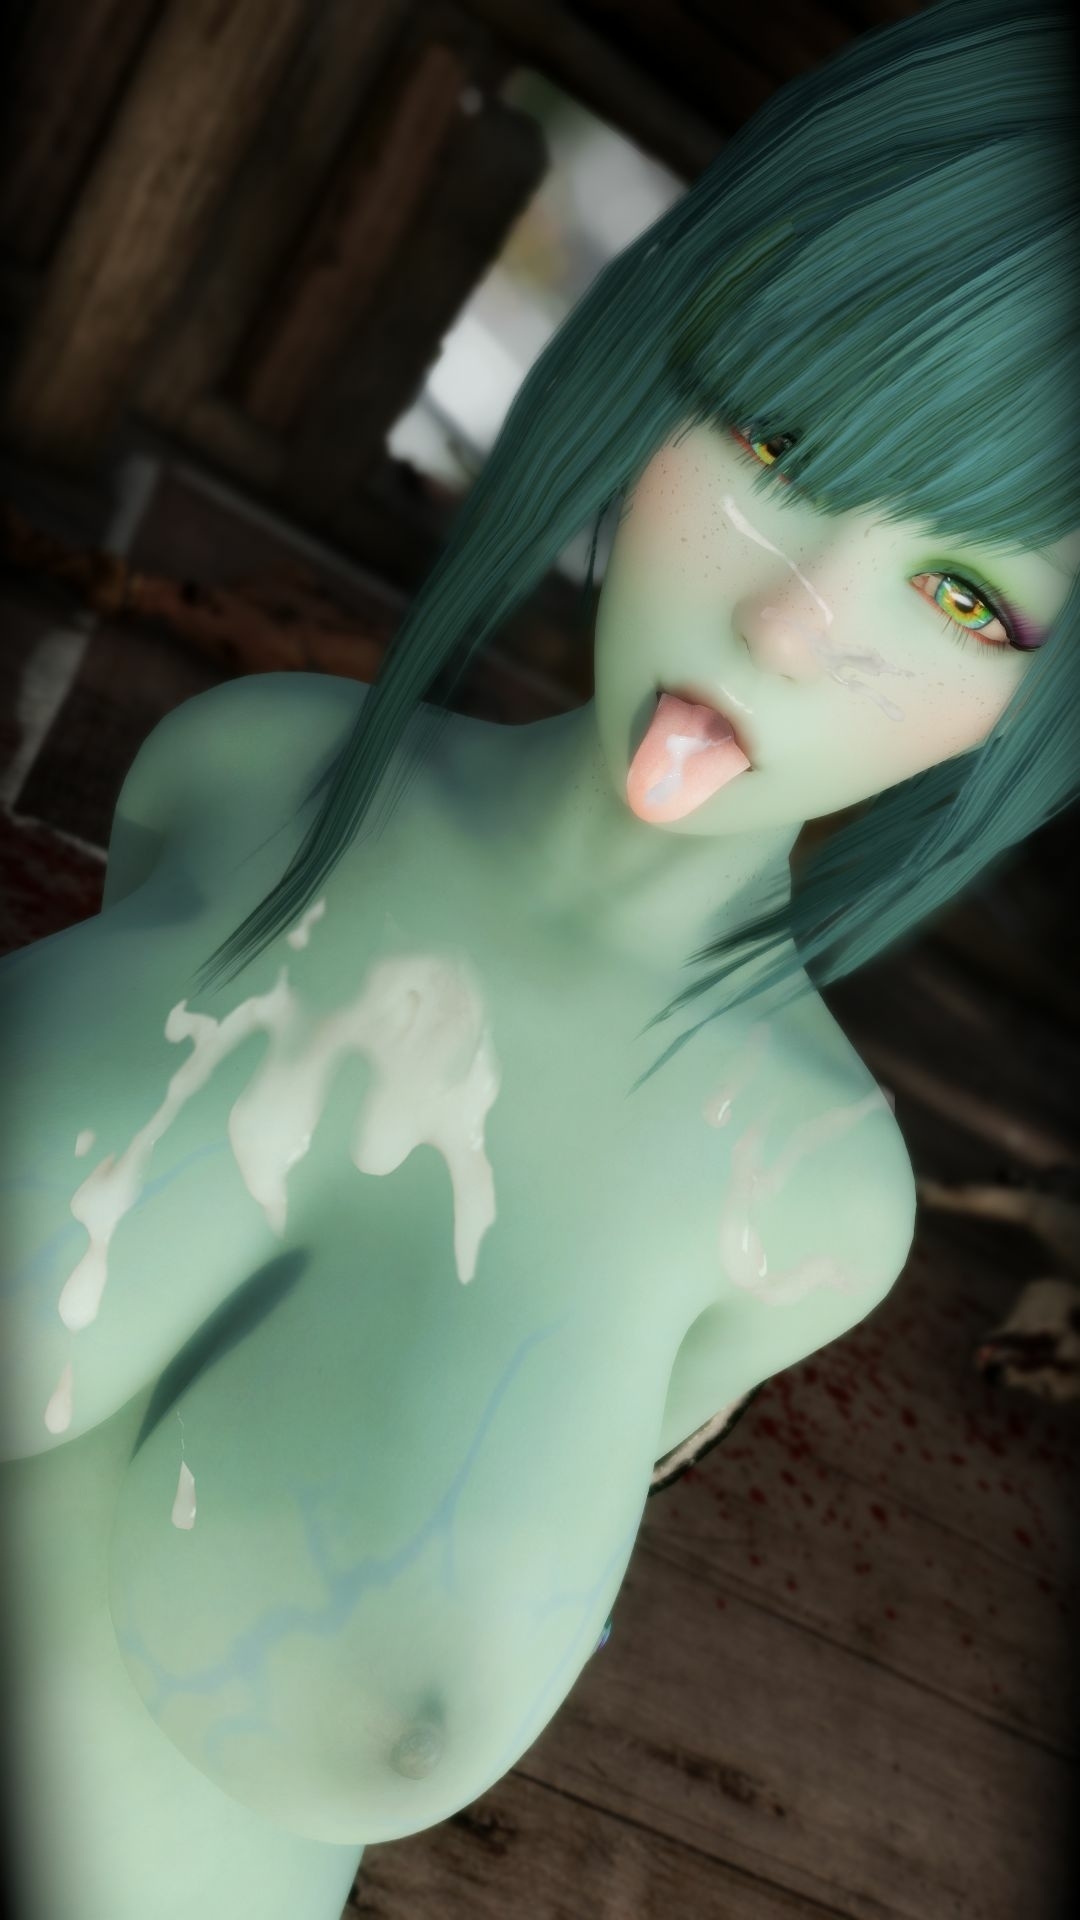 Miss blue taking a sloppy orc s load to the mouth Skyrim Nsfw Videogame Sexy 3d Girl 3d Porn Pretty Nude Sex Whore Orc Oral Sucking Cock Blowjob Breeding Argonian